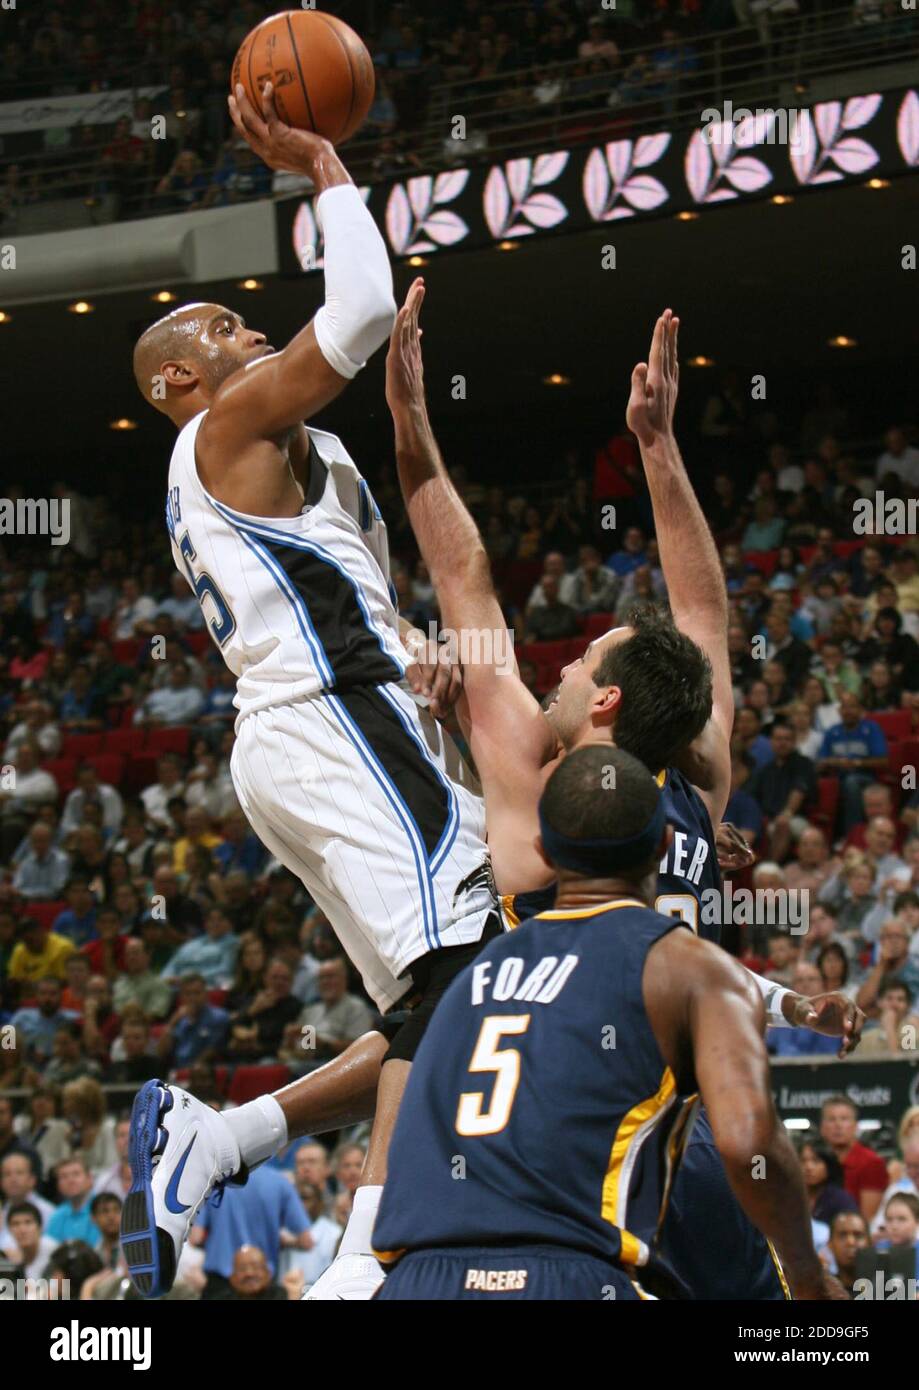 NO FILM, NO VIDEO, NO TV, NO DOCUMENTARY - Orlando Magic guard Vince Carter shoots over Indiana defenders during the first half of an NBA game at Amway Arena in Orlando, FL, USA on December 14, 2009. Photo by Stephen M. Dowell/Orlando Sentinel/MCT/Cameleon/ABACAPRESS.COM Stock Photo